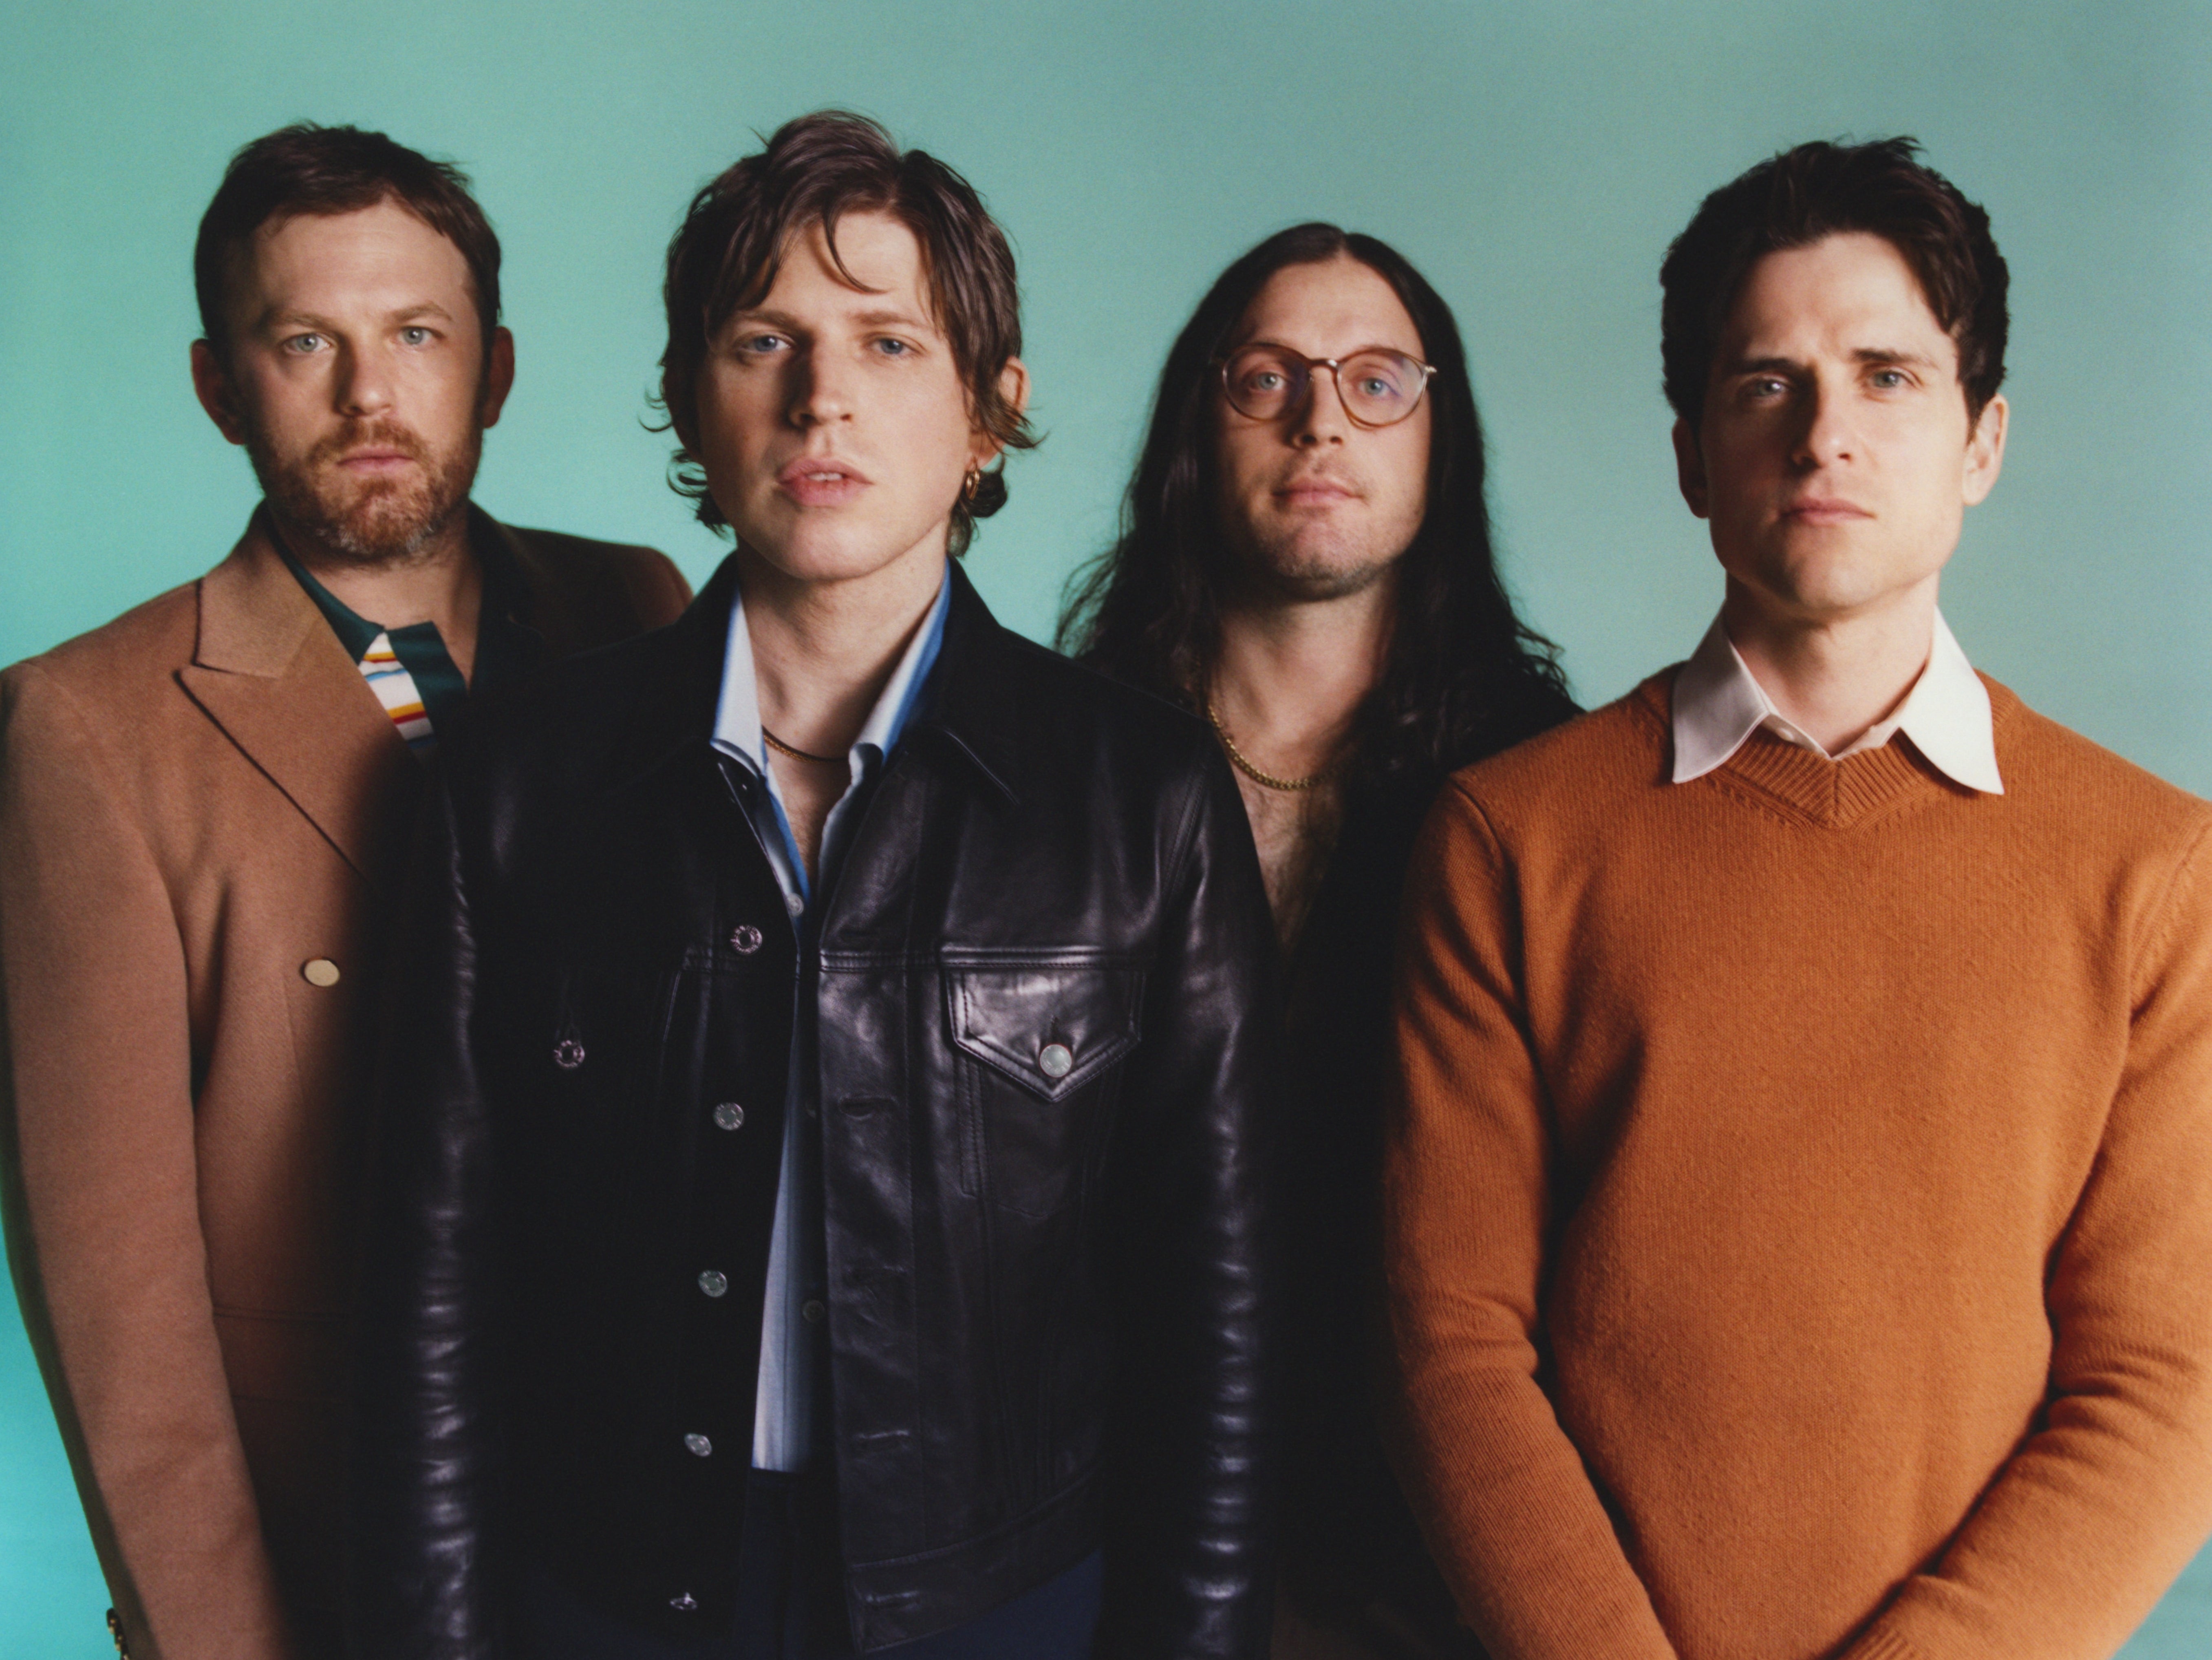 Kings of Leon: ‘The older you get, the more you don’t really give a s*** about what everyone else thinks'